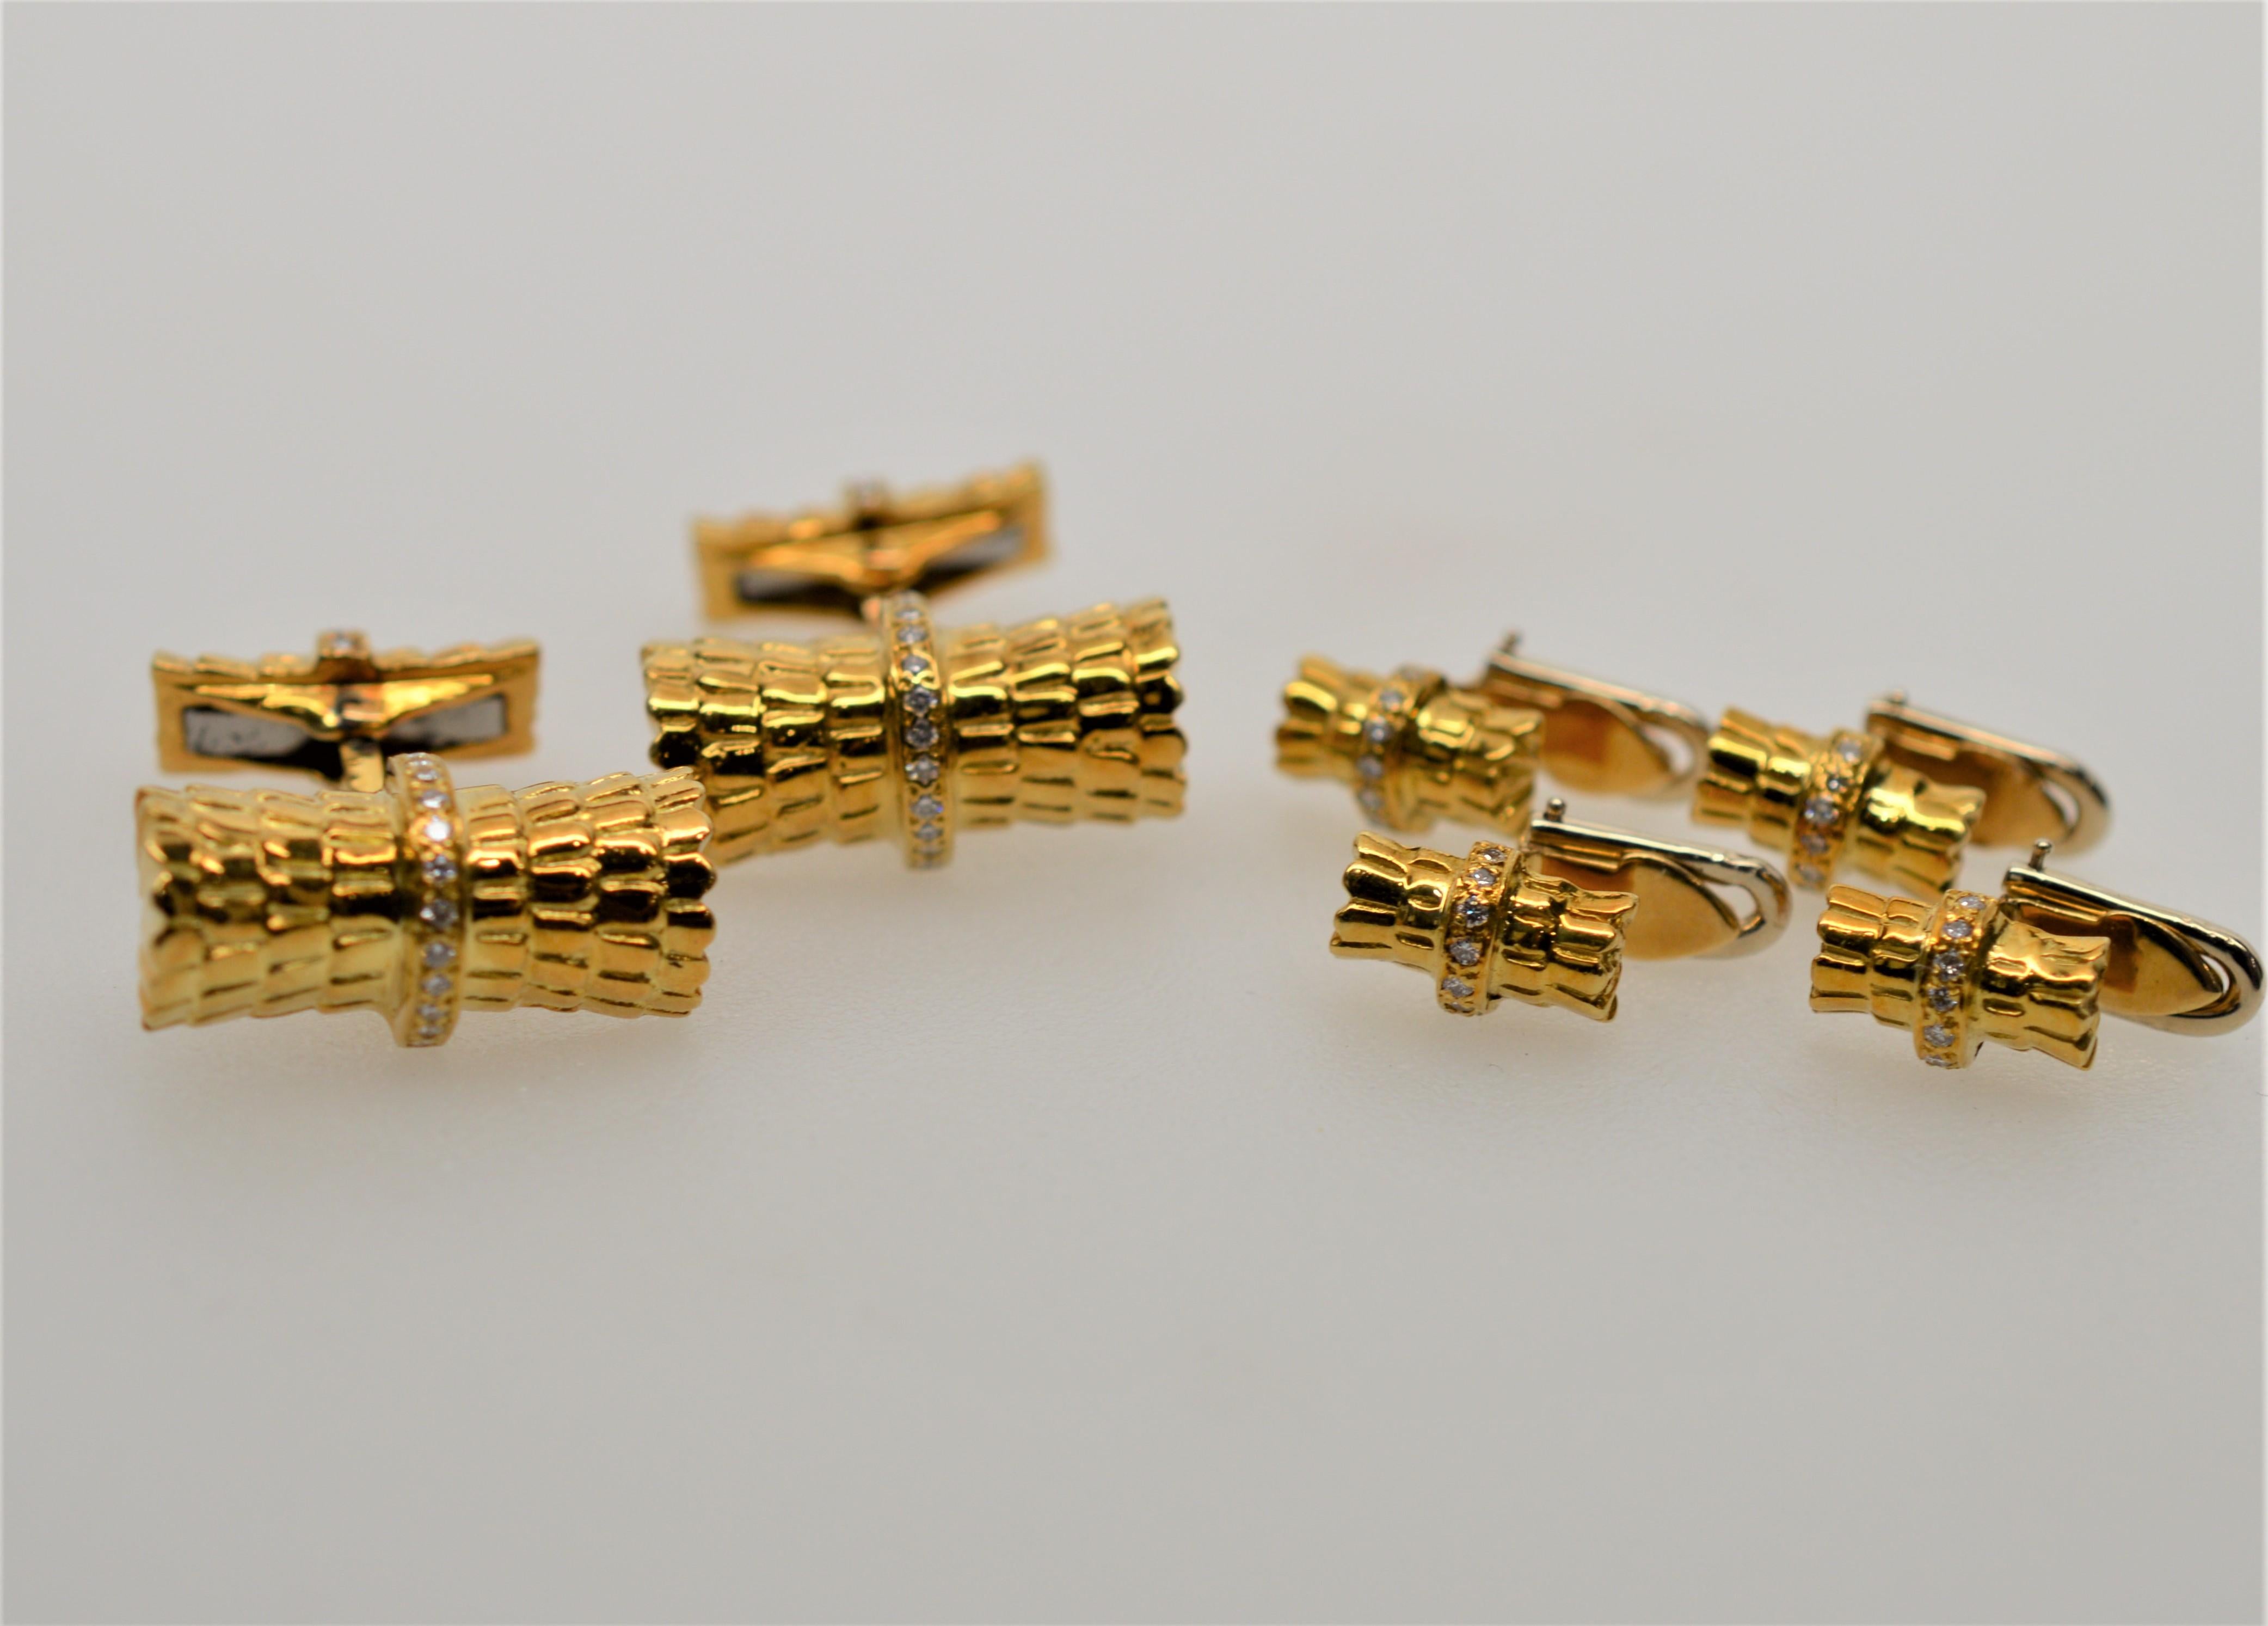 Sophisticated six-piece eighteen karat (18K) yellow gold cuff links and stud set in mint condition.  With elegant eighteen karat (18K) yellow gold with diamond accents, the presenting cuff links measure approximately 6/8 inch in length by 3/8 inch